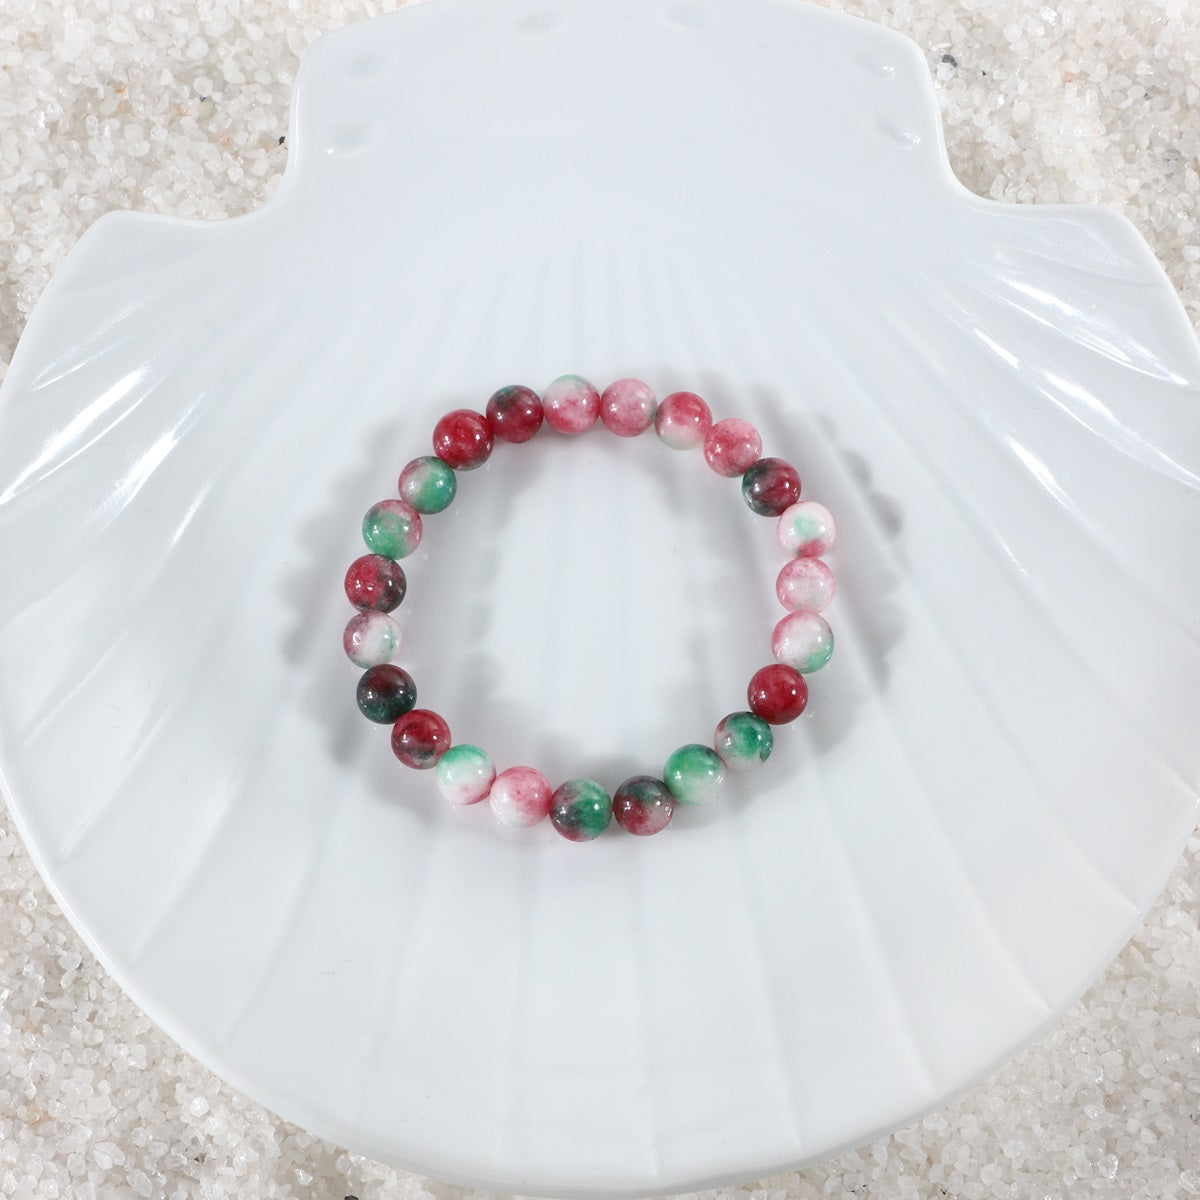 Symbolic image representing emotional healing associated with Watermelon Quartz, portraying the bracelet as a source of comfort and positive emotional energies